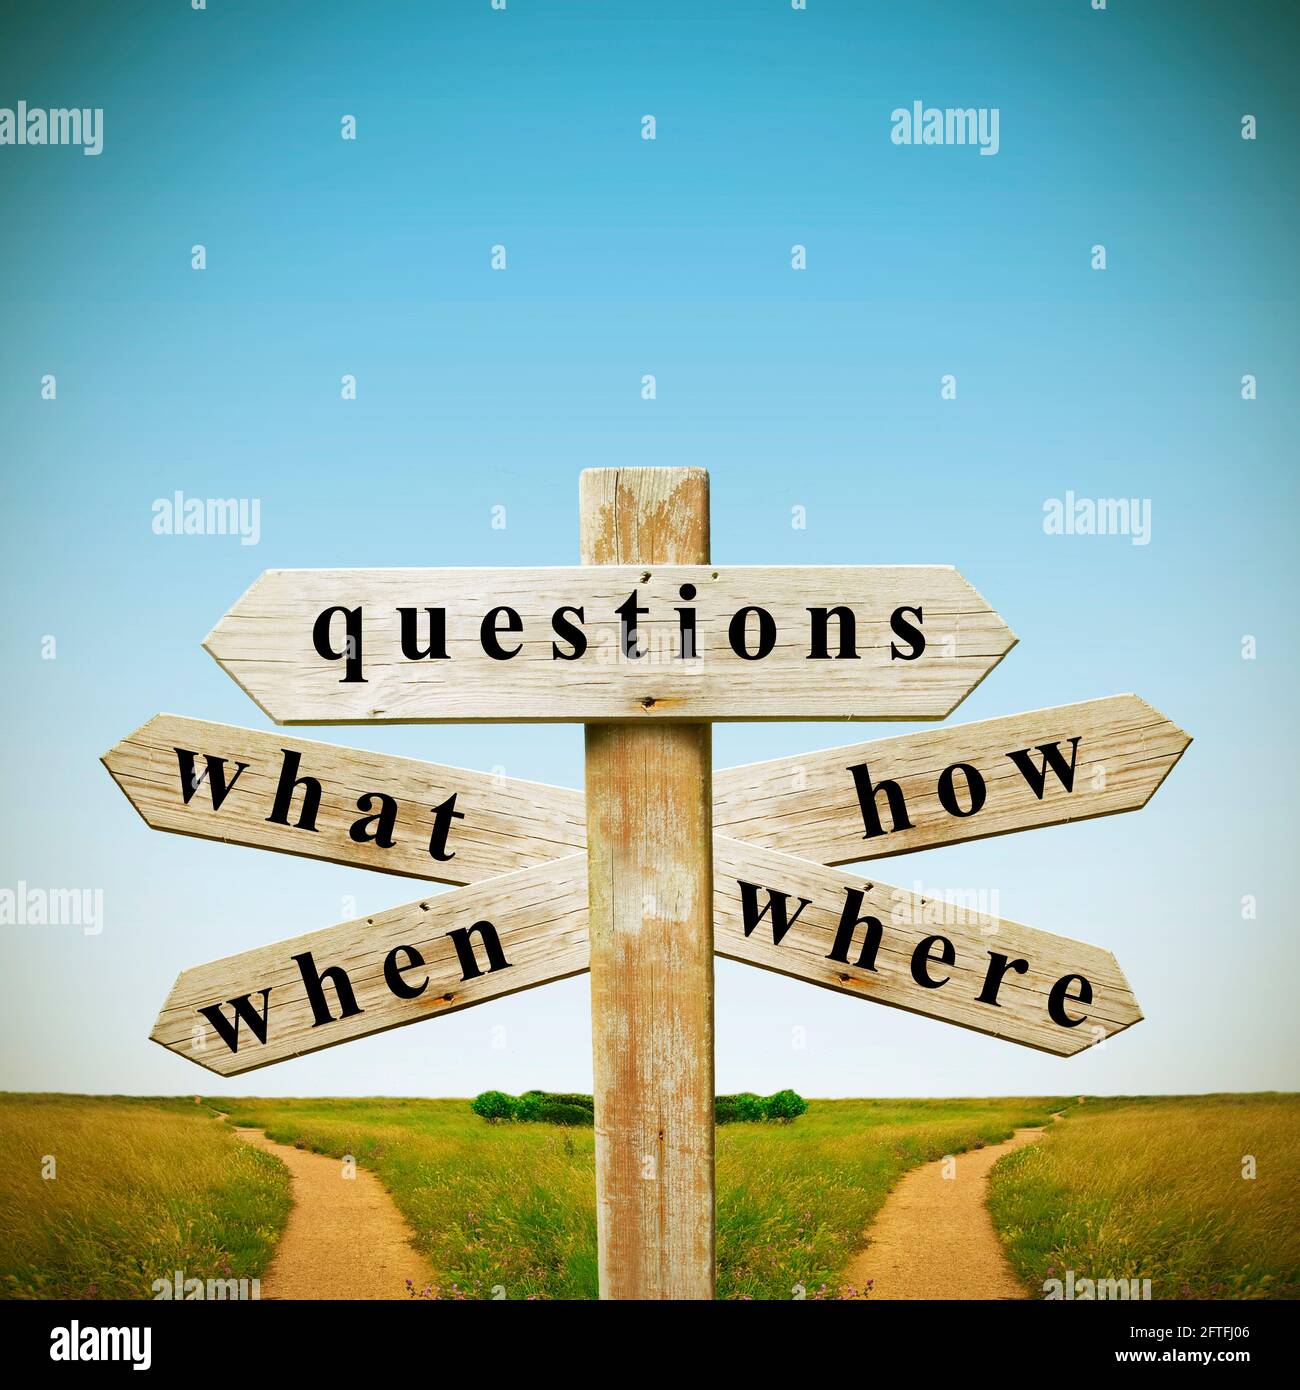 questions and answers Stock Photo